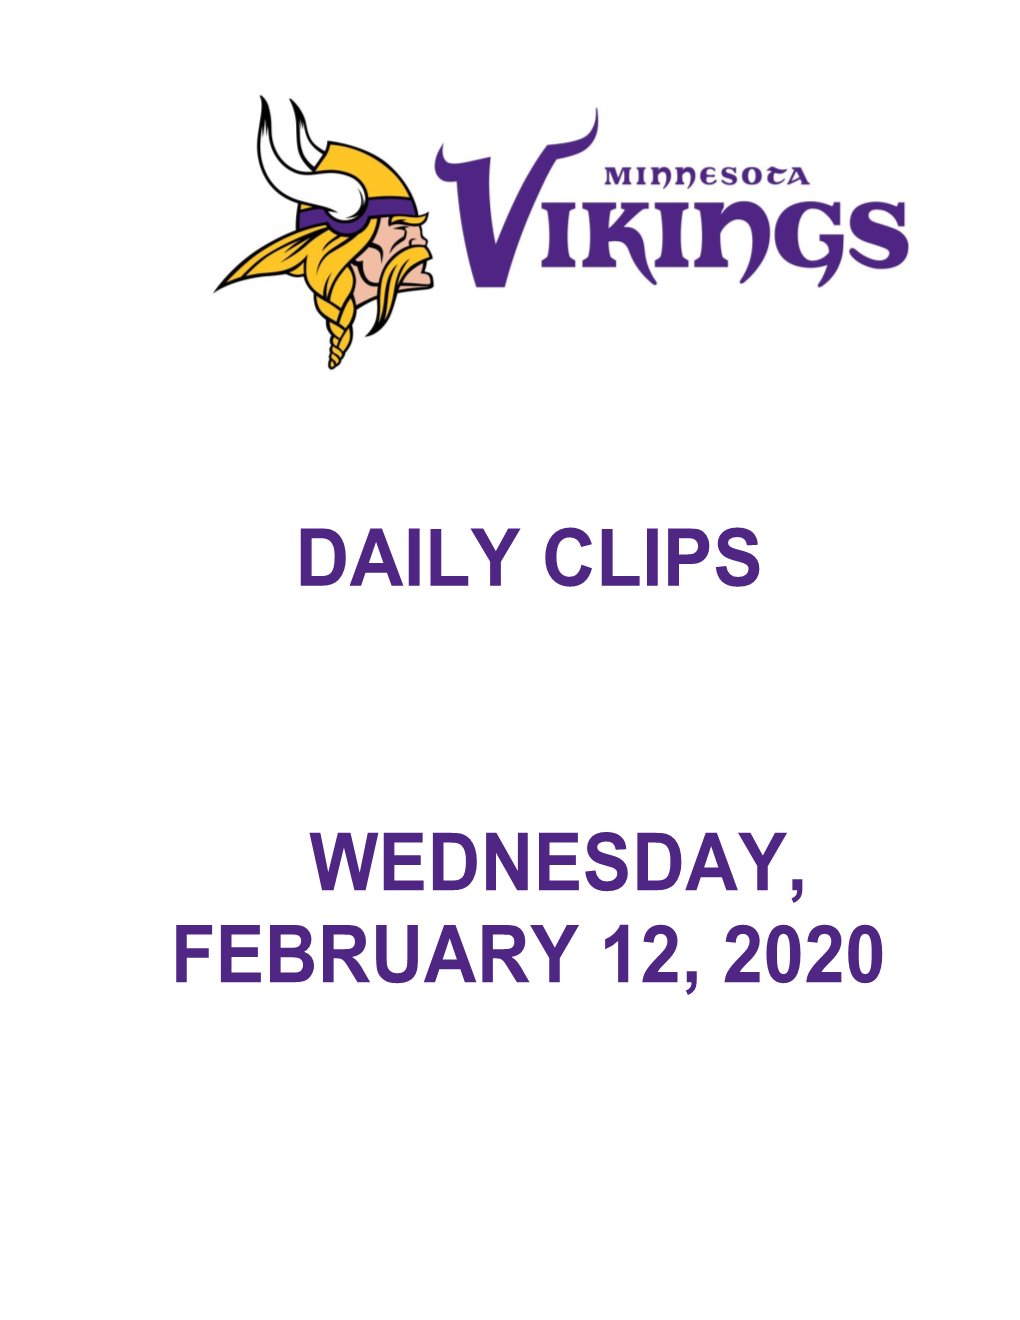 Daily Clips Wednesday, February 12, 2020